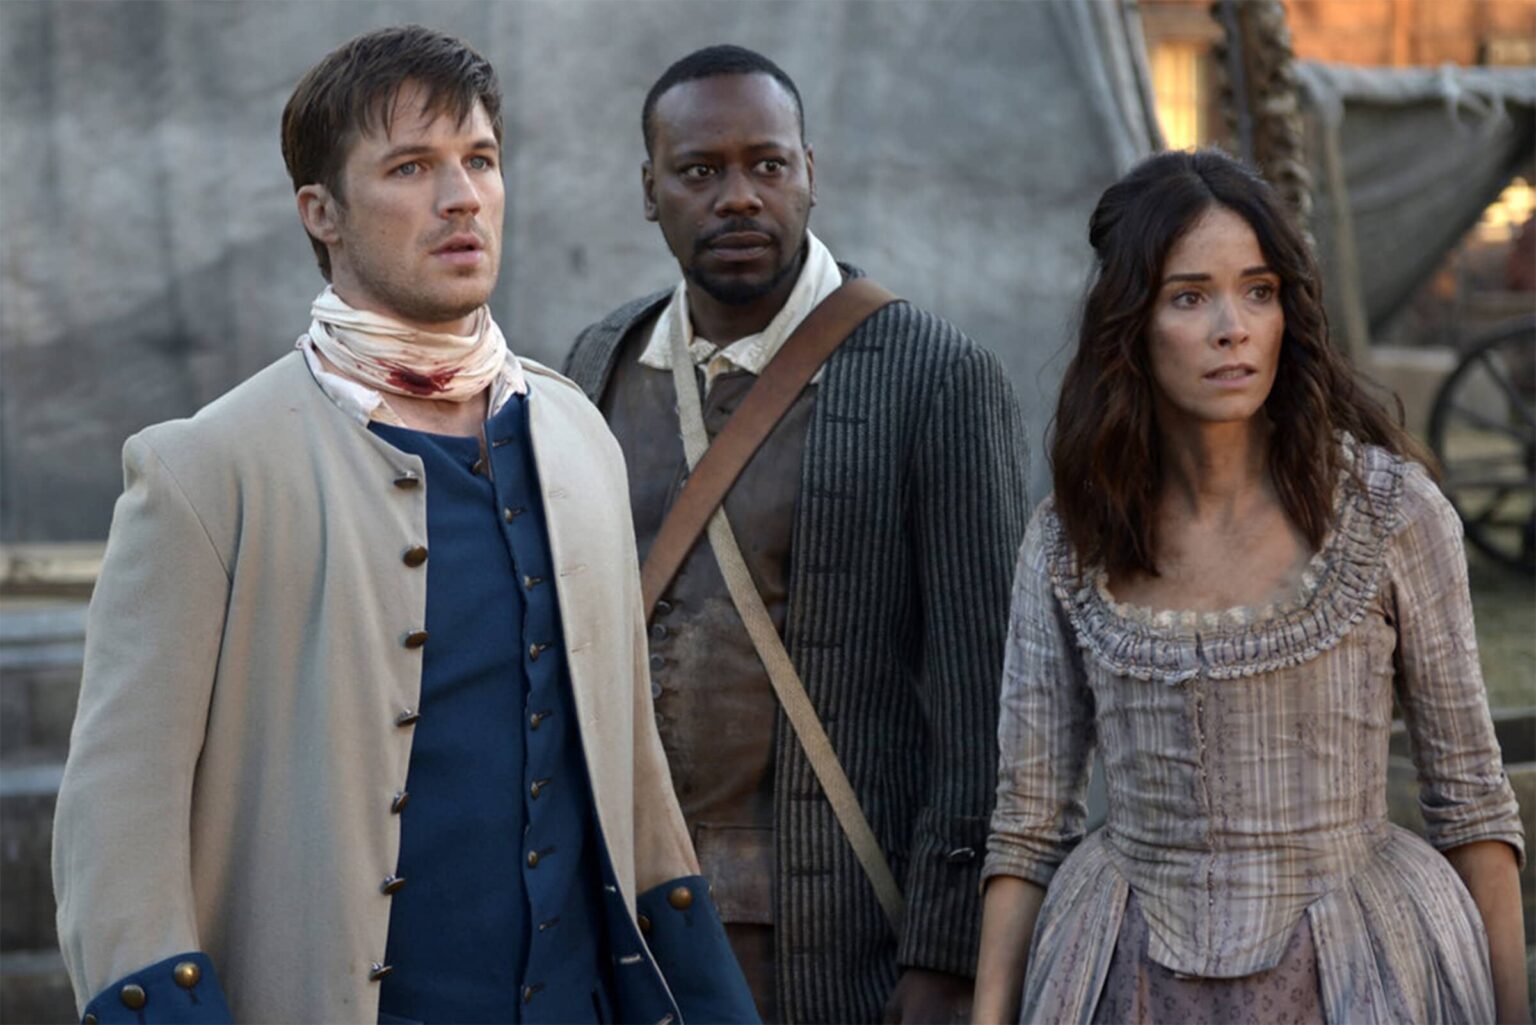 'Timeless' has a talented cast and time-hopping plotline. It quickly became a favorite for fantasy fans. Here's what the cast are up to now.